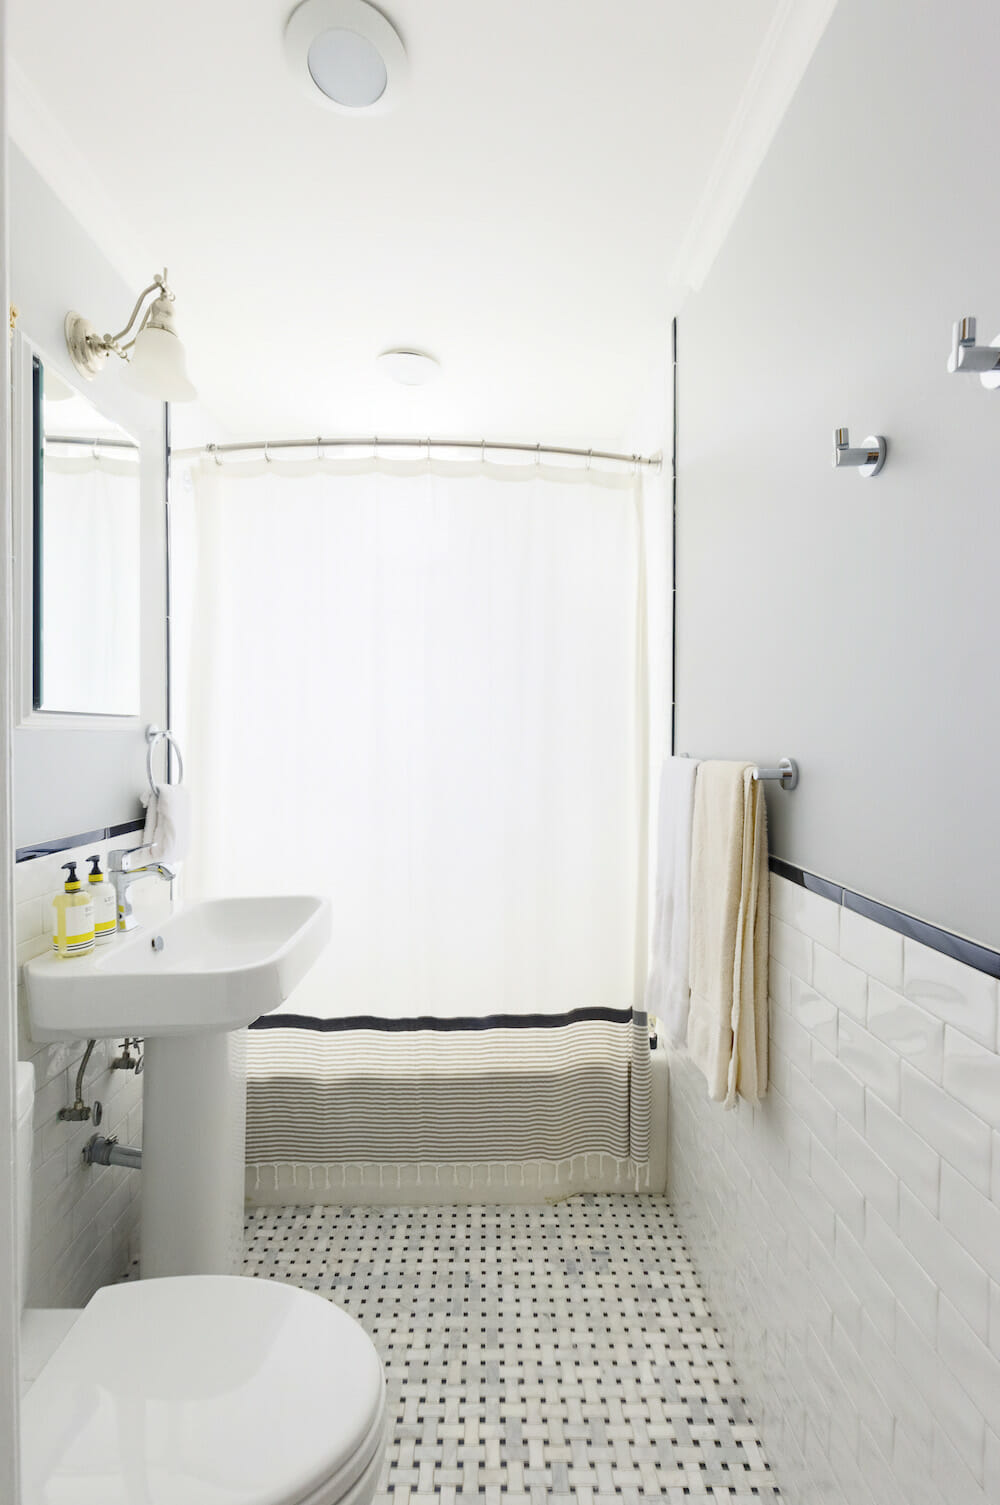 Bathroom Tiles And How Much They Cost, How Much Does Shower Tile Cost Per Square Foot